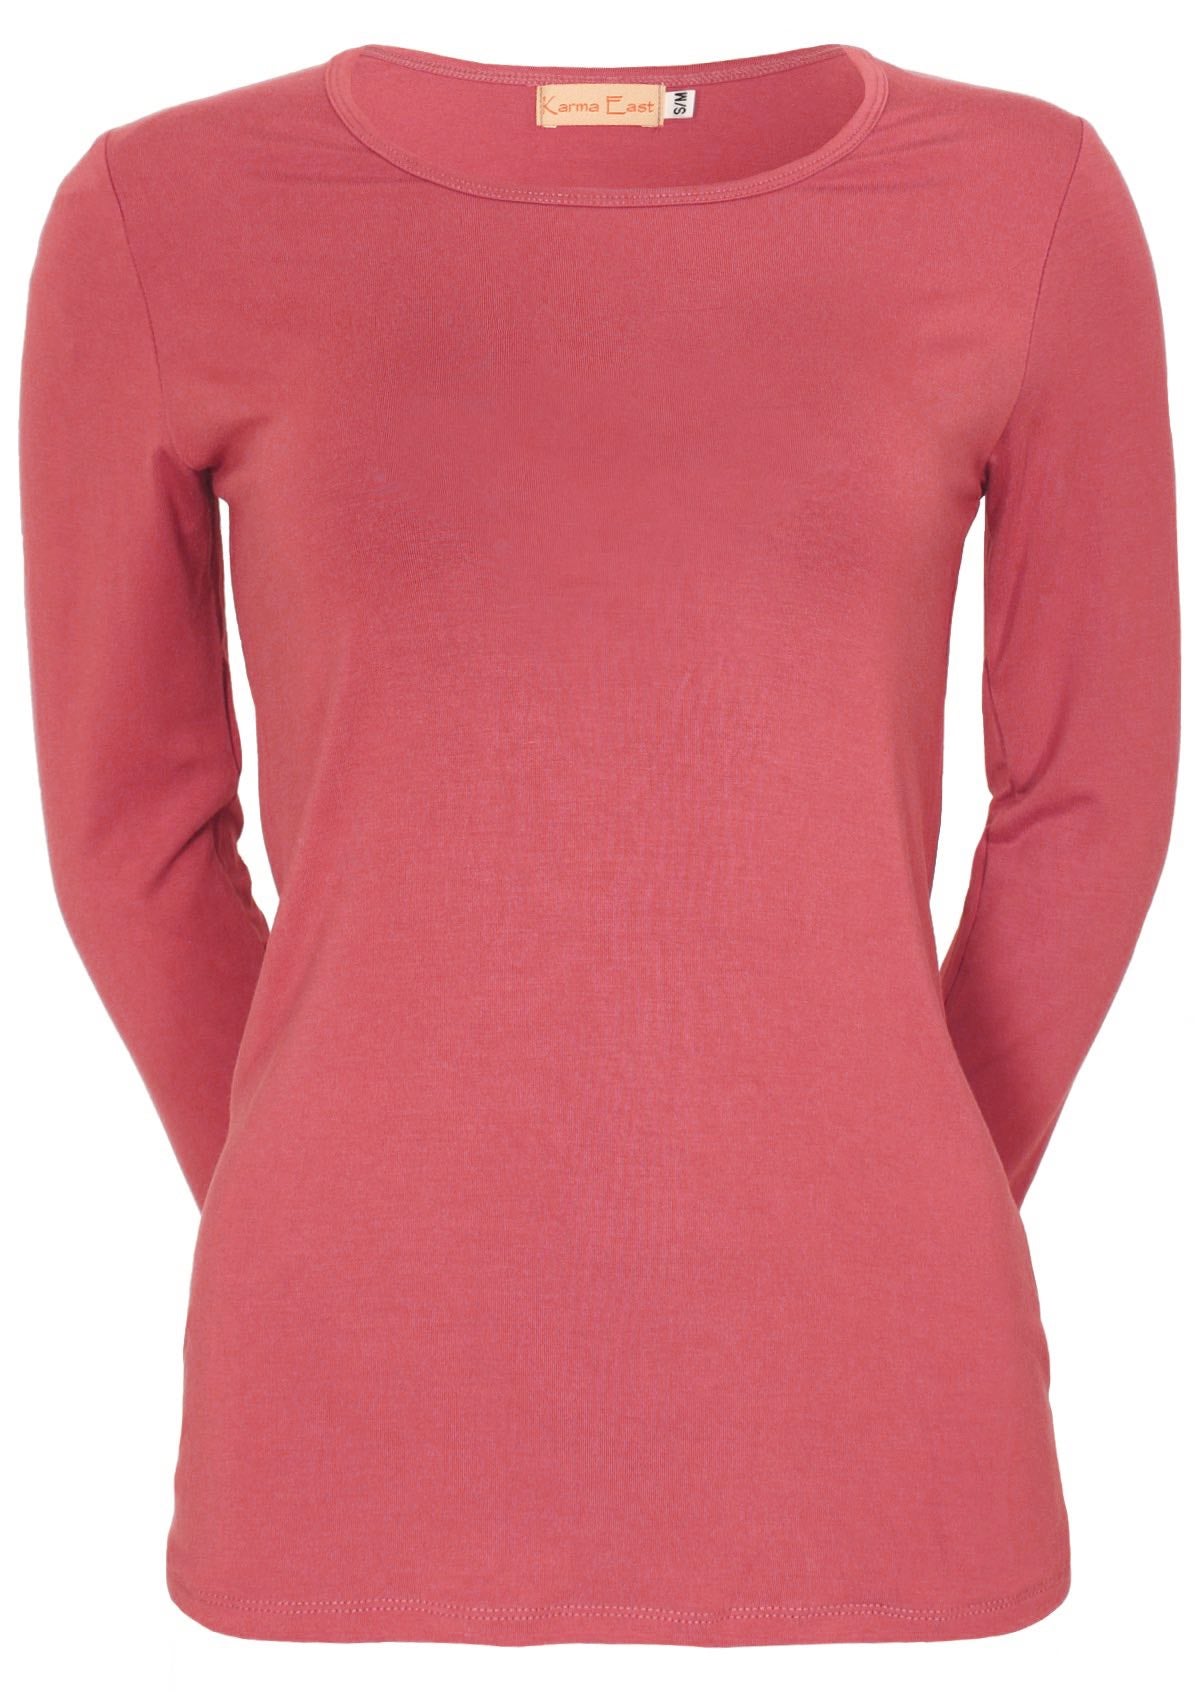 Front view of women's round neck pink long sleeve rayon top.